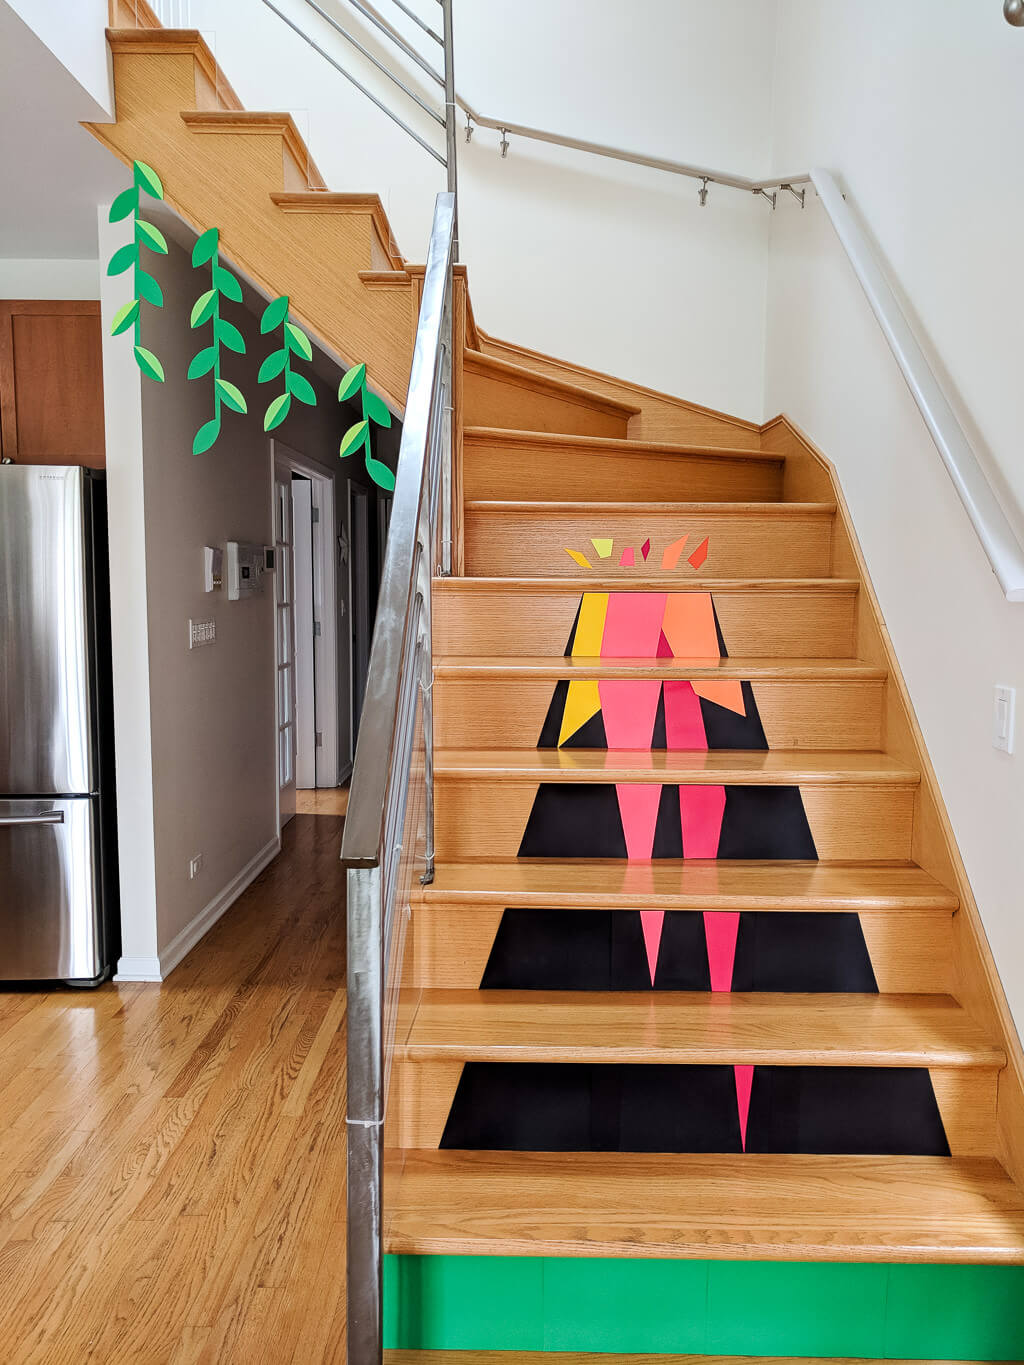 DIY paper volcano decor on stairs